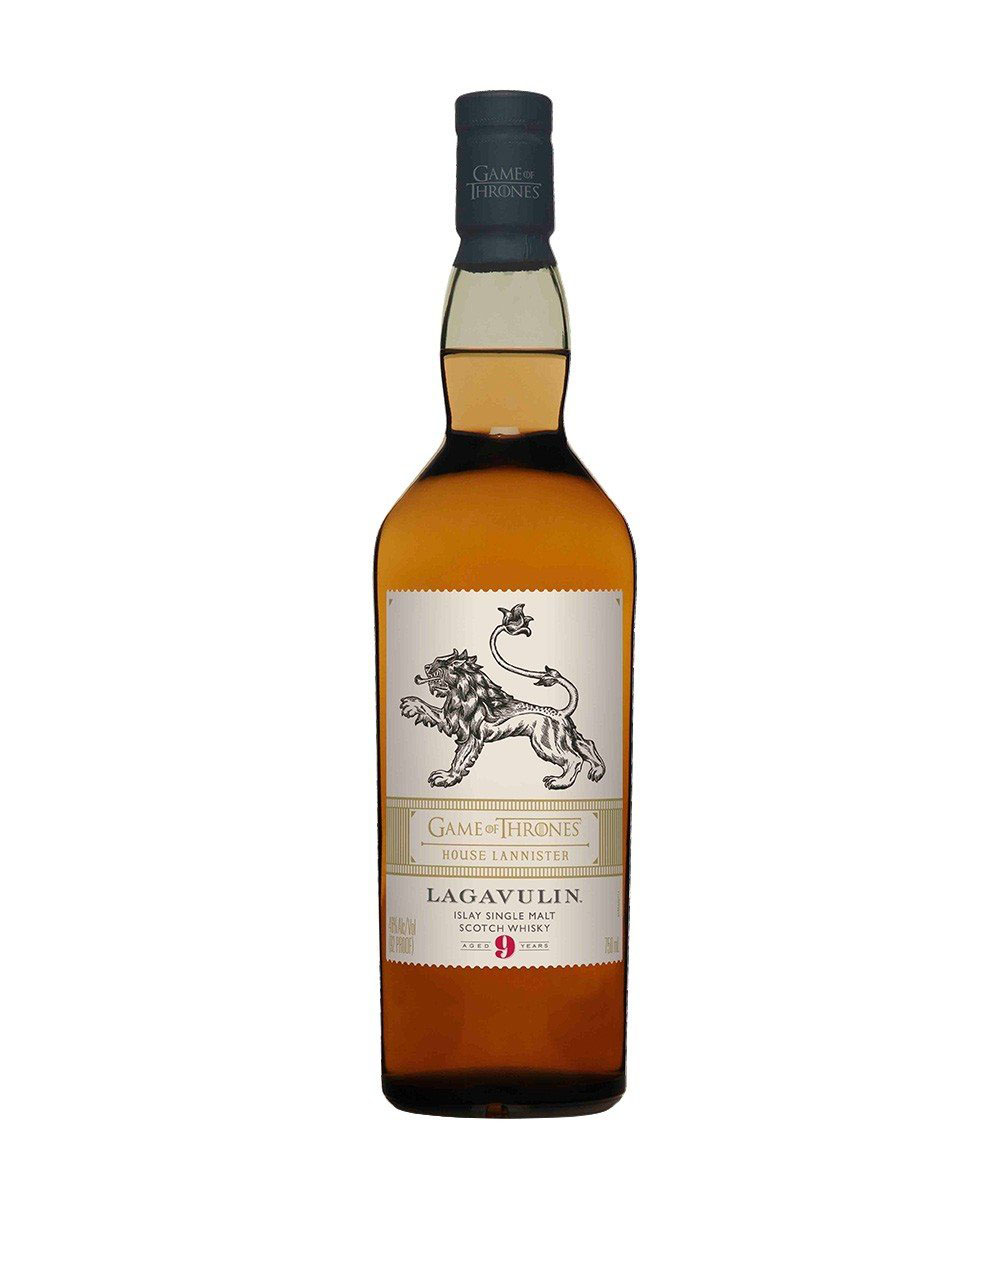 Game of Thrones House Lannister - Lagavulin 9 Year Old